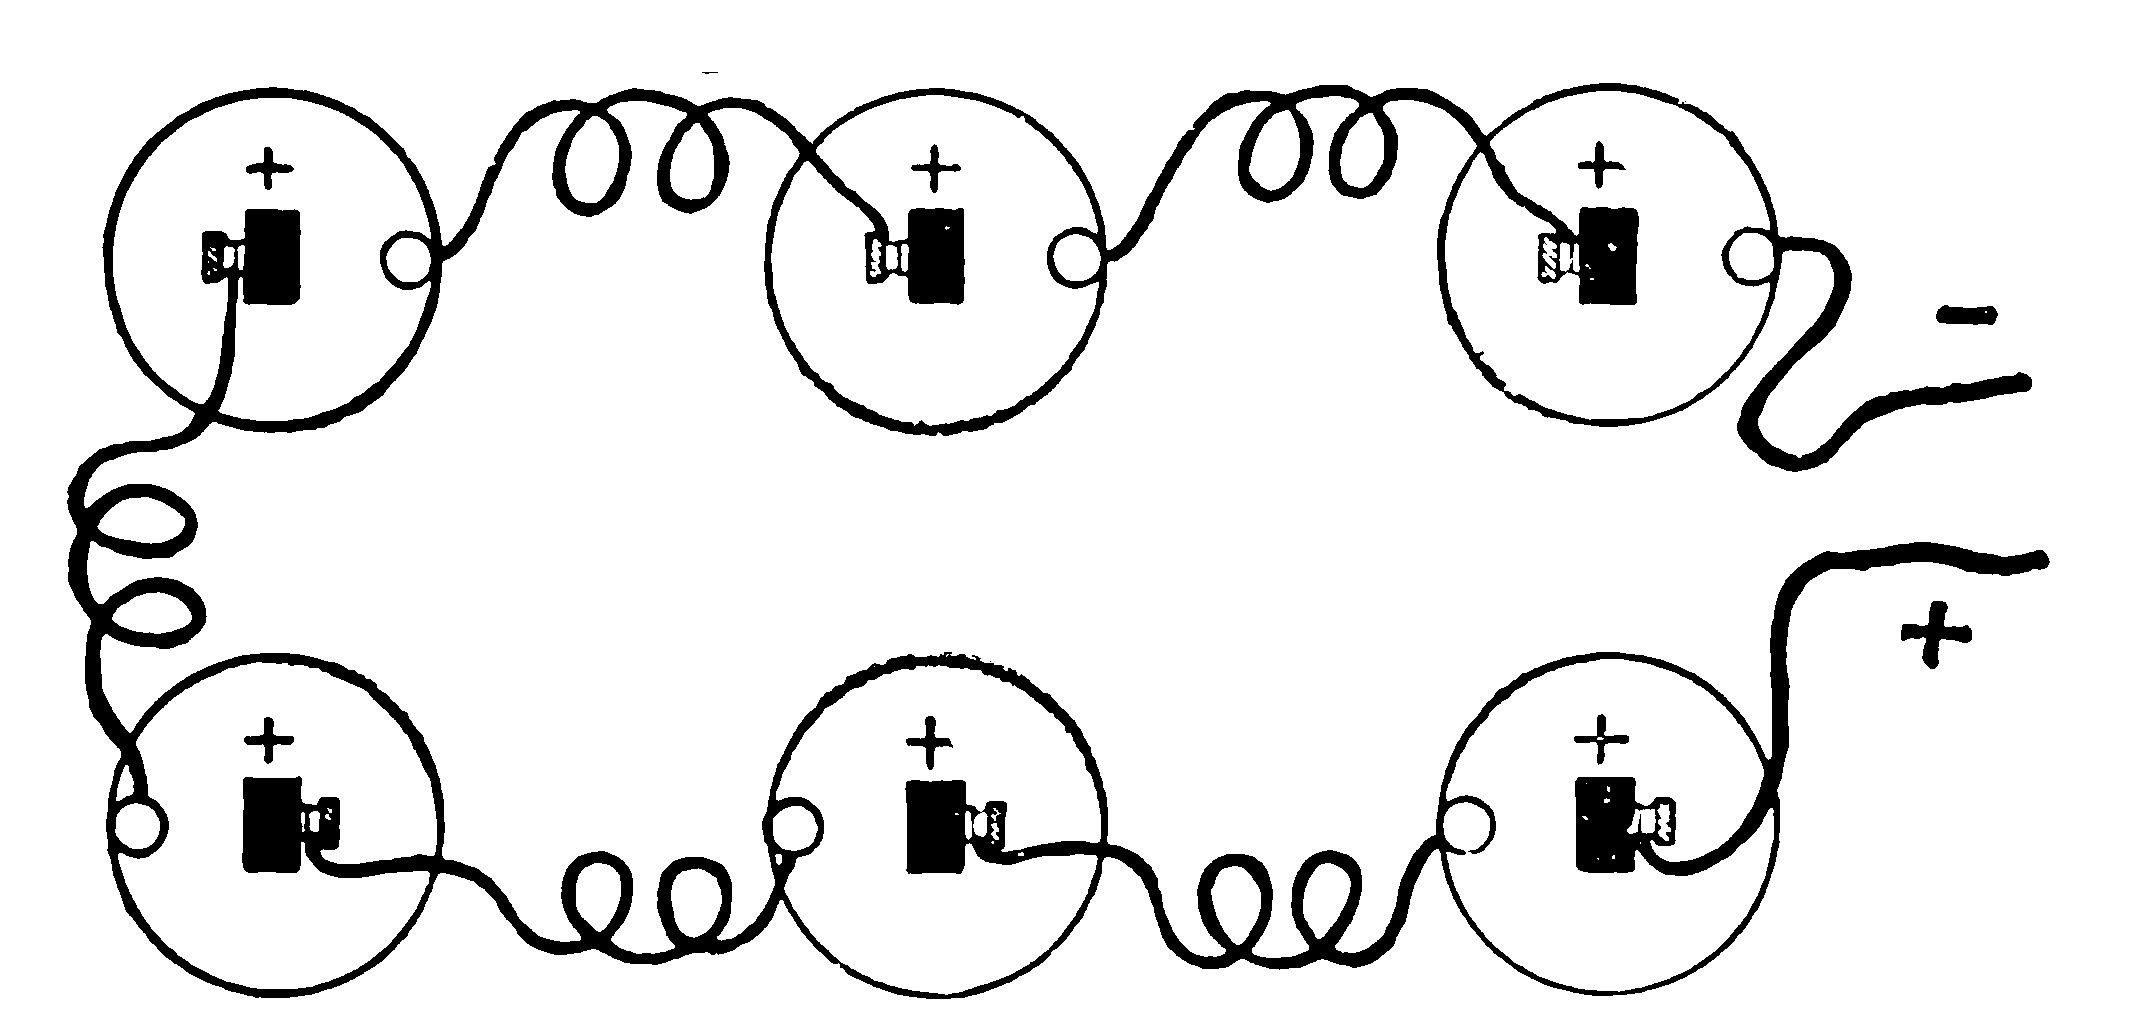 FIG. 33.—Showing how Cells are arranged when they are connected in Series.